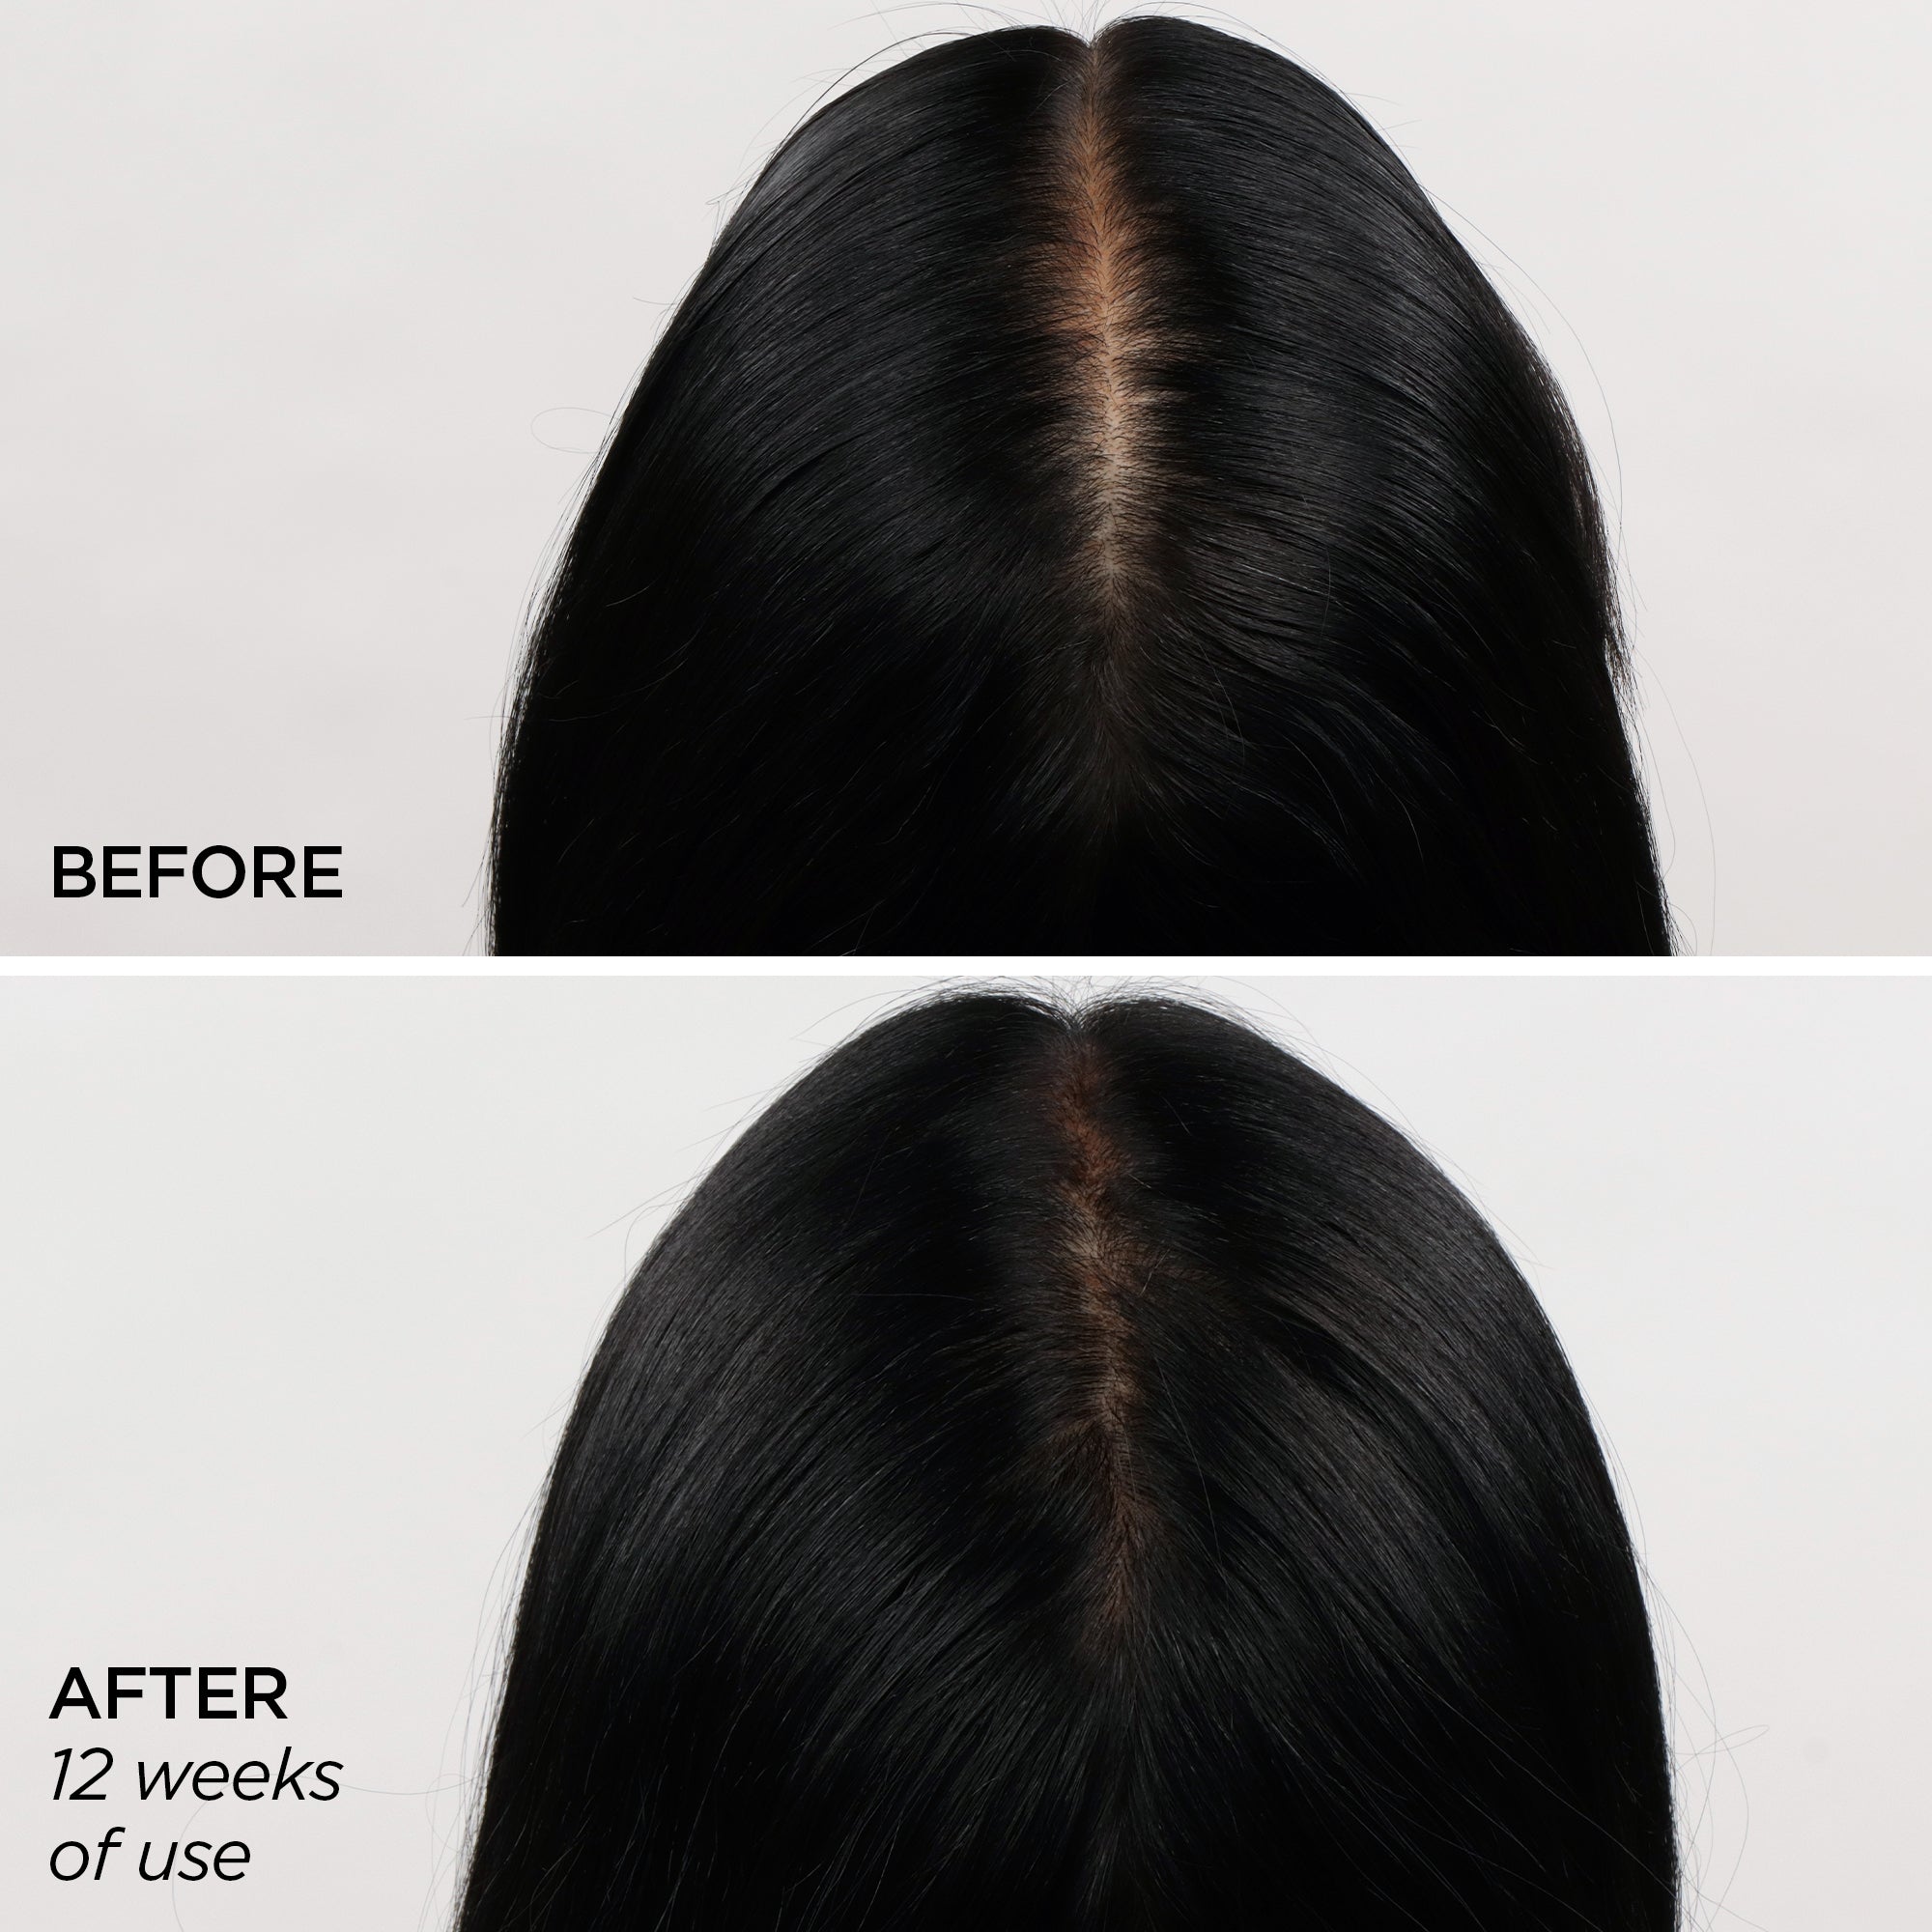 Before & After using the Scalp MicroTip and Scalp Serum